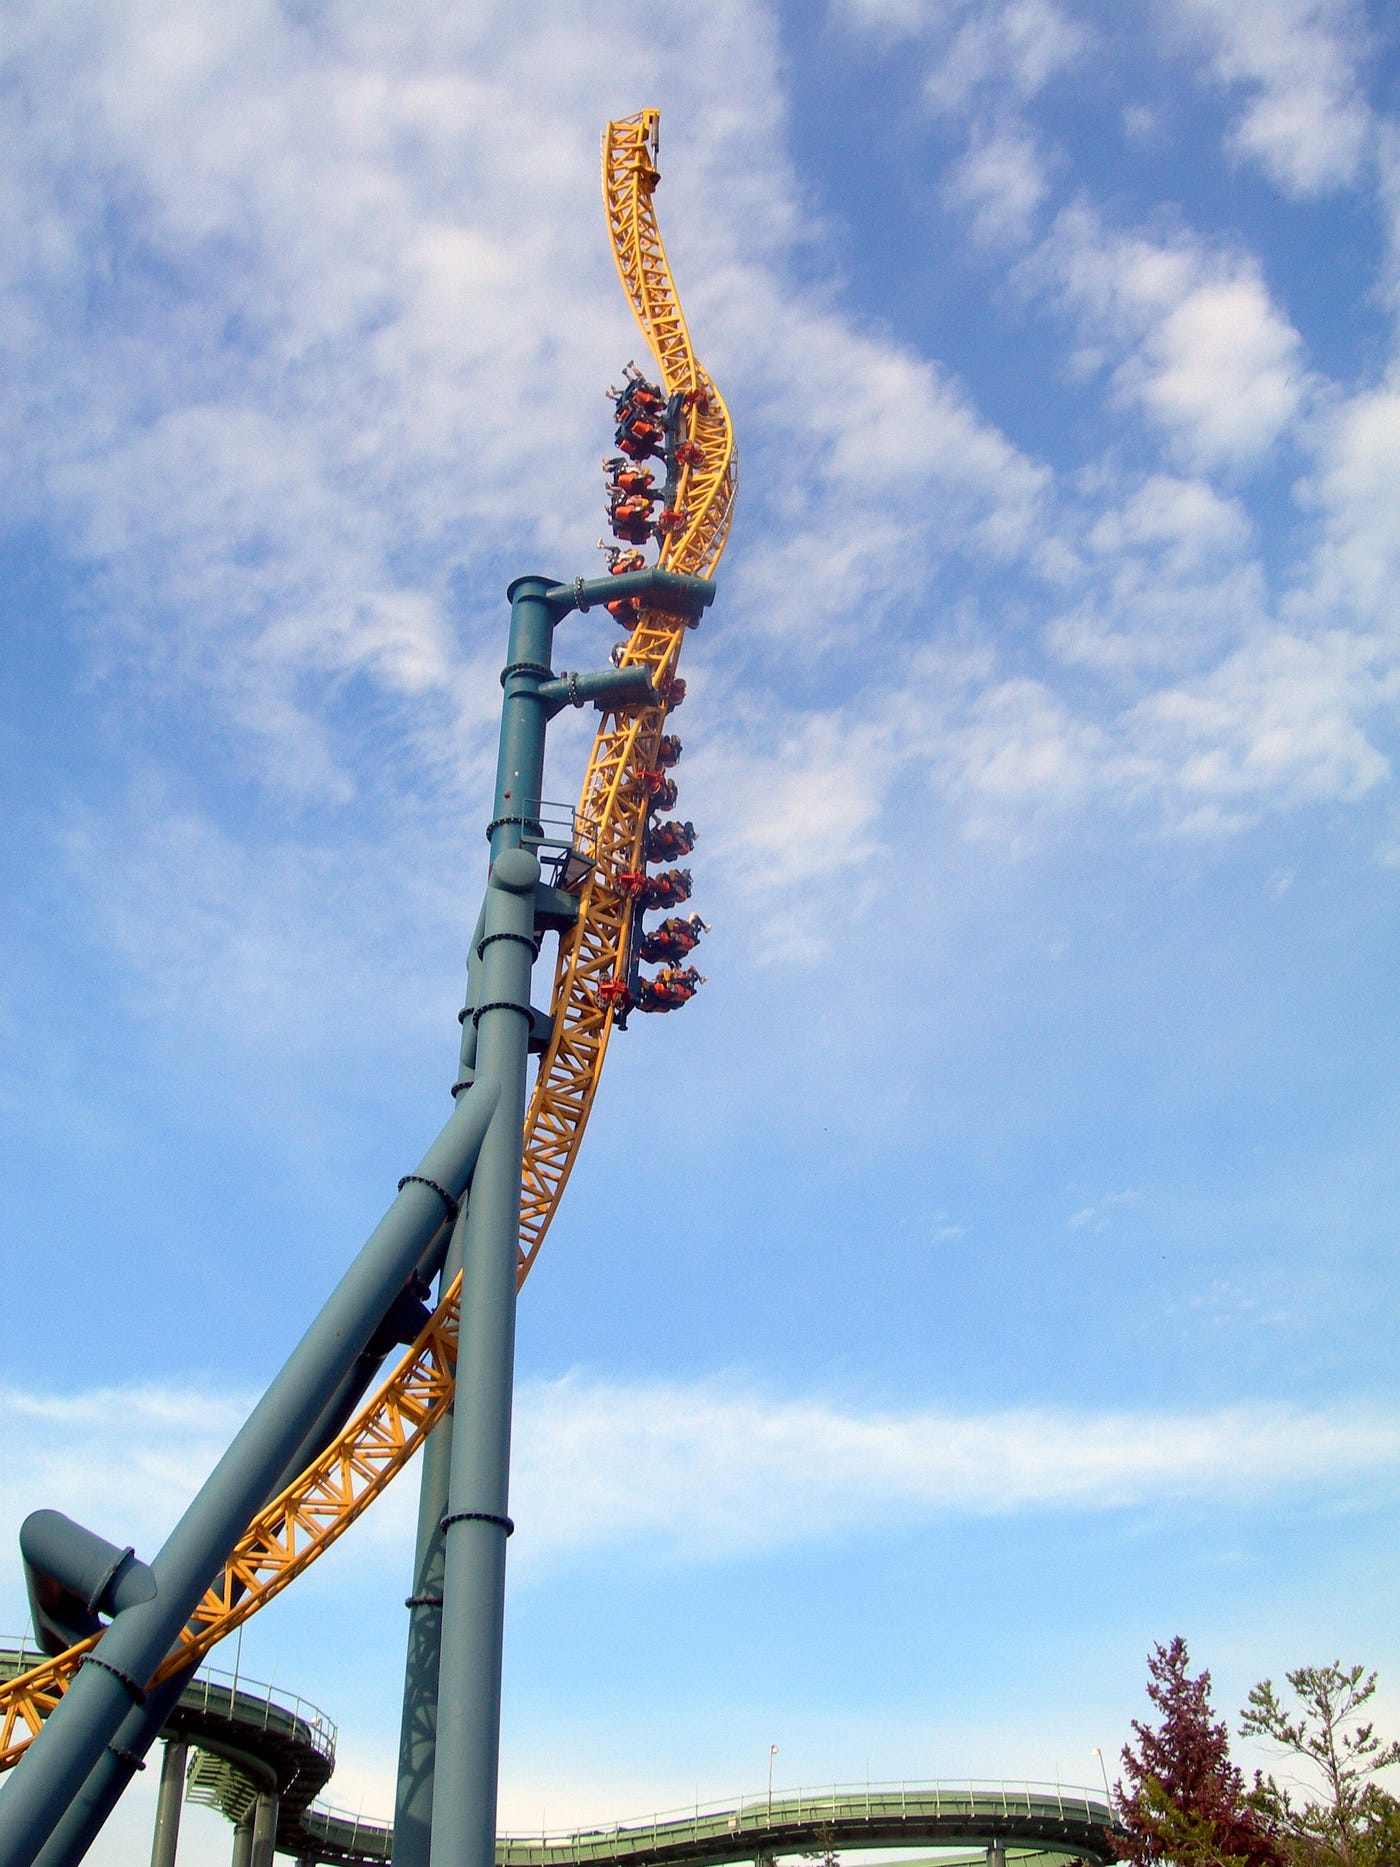 Thrill Rides at Six Flags Great America in Chicago